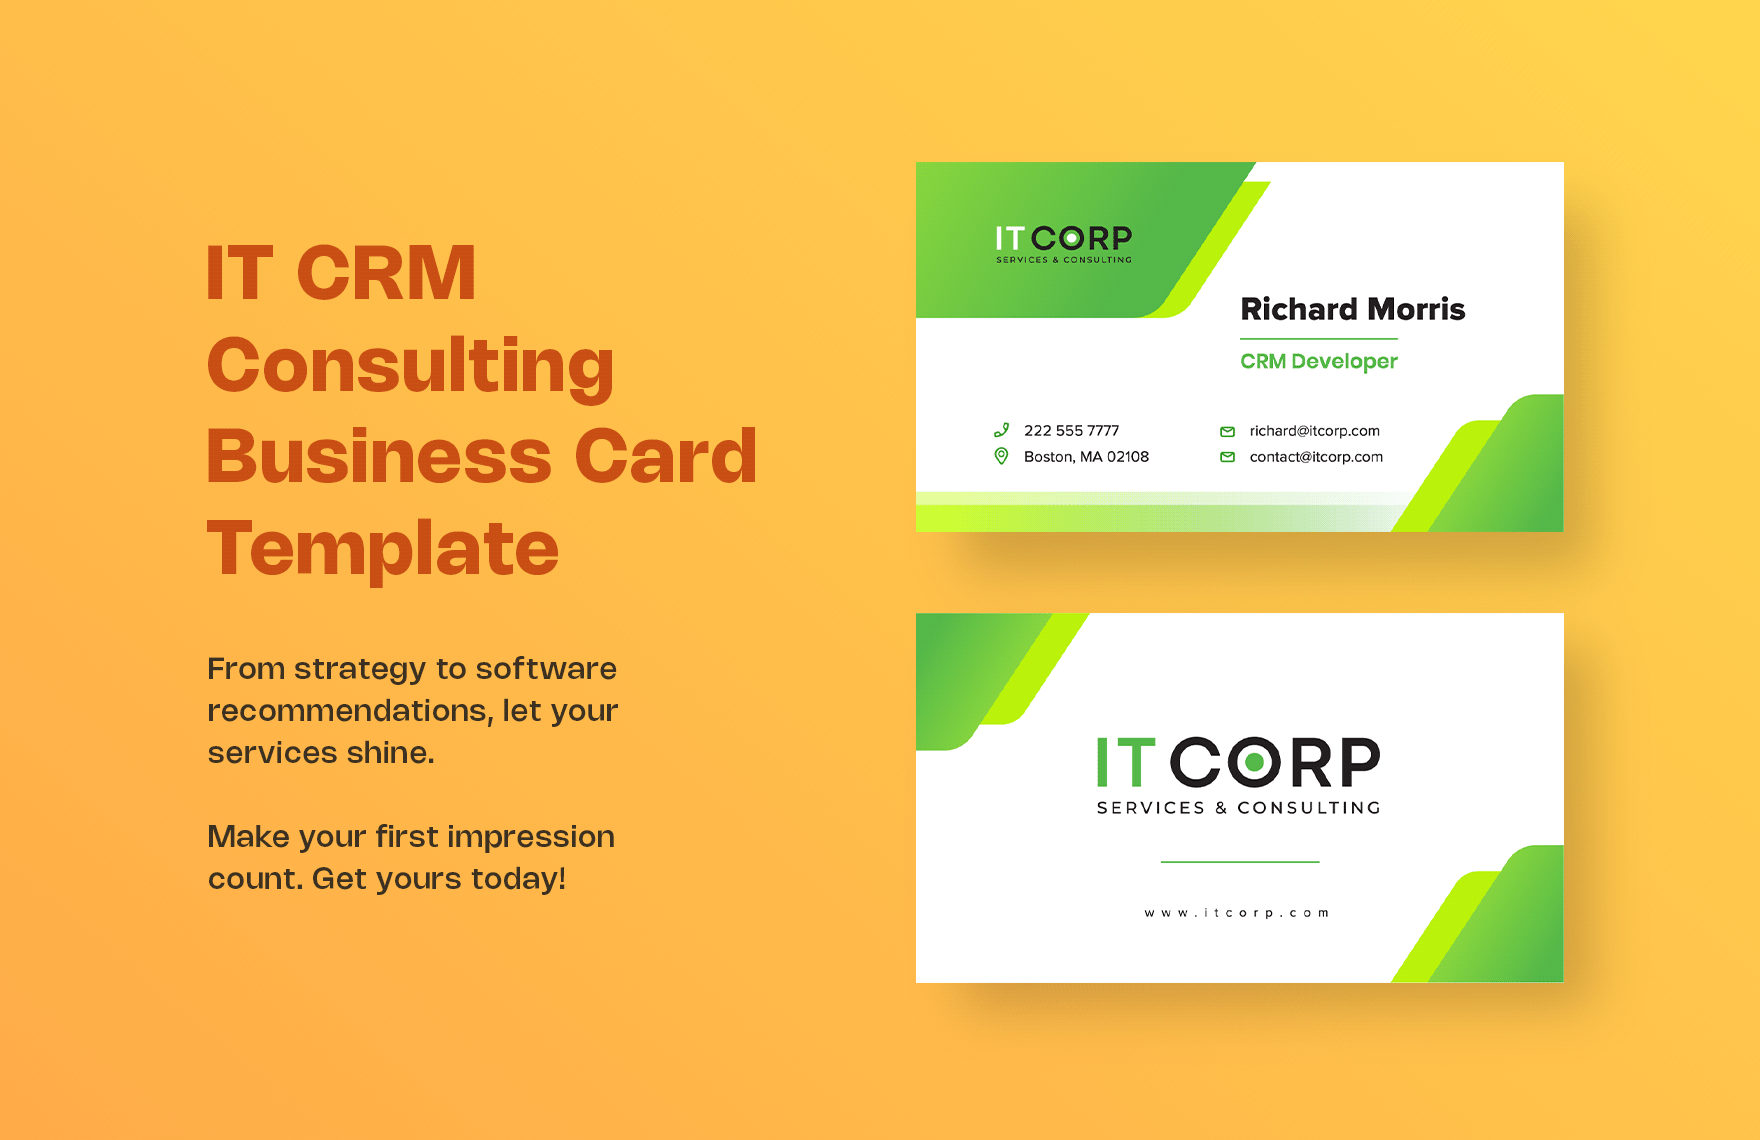 IT CRM Consulting Business Card Template in Word, Illustrator, PSD